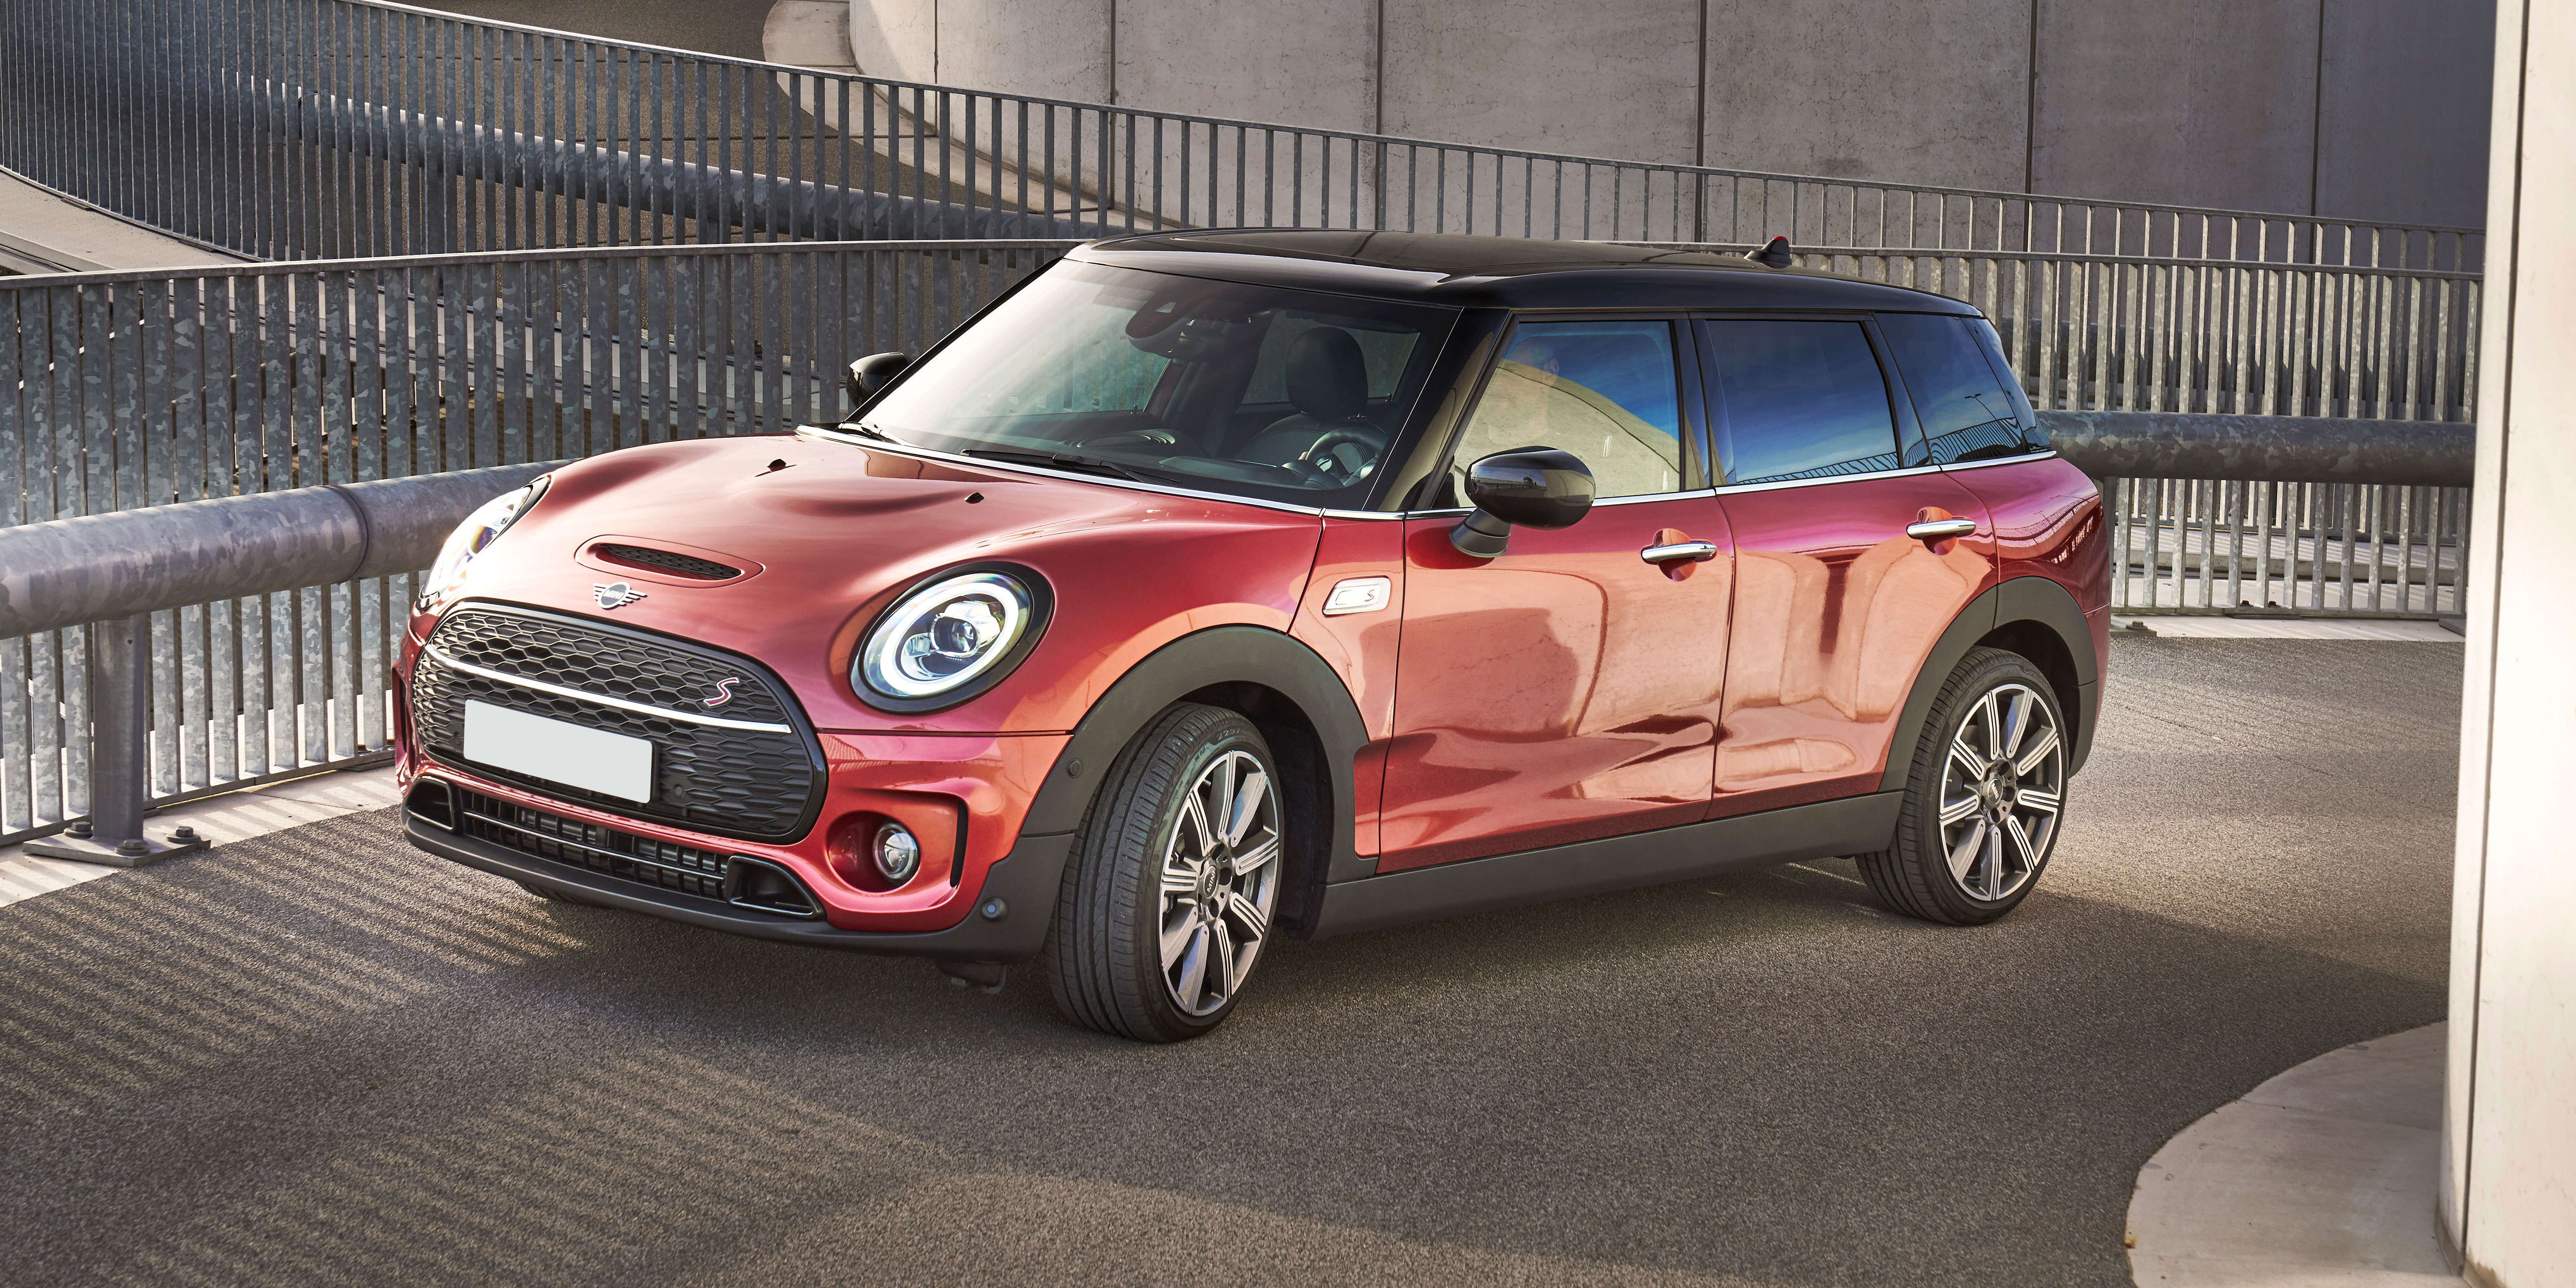 Autocar Reviews the 2015 Clubman S - MotoringFile